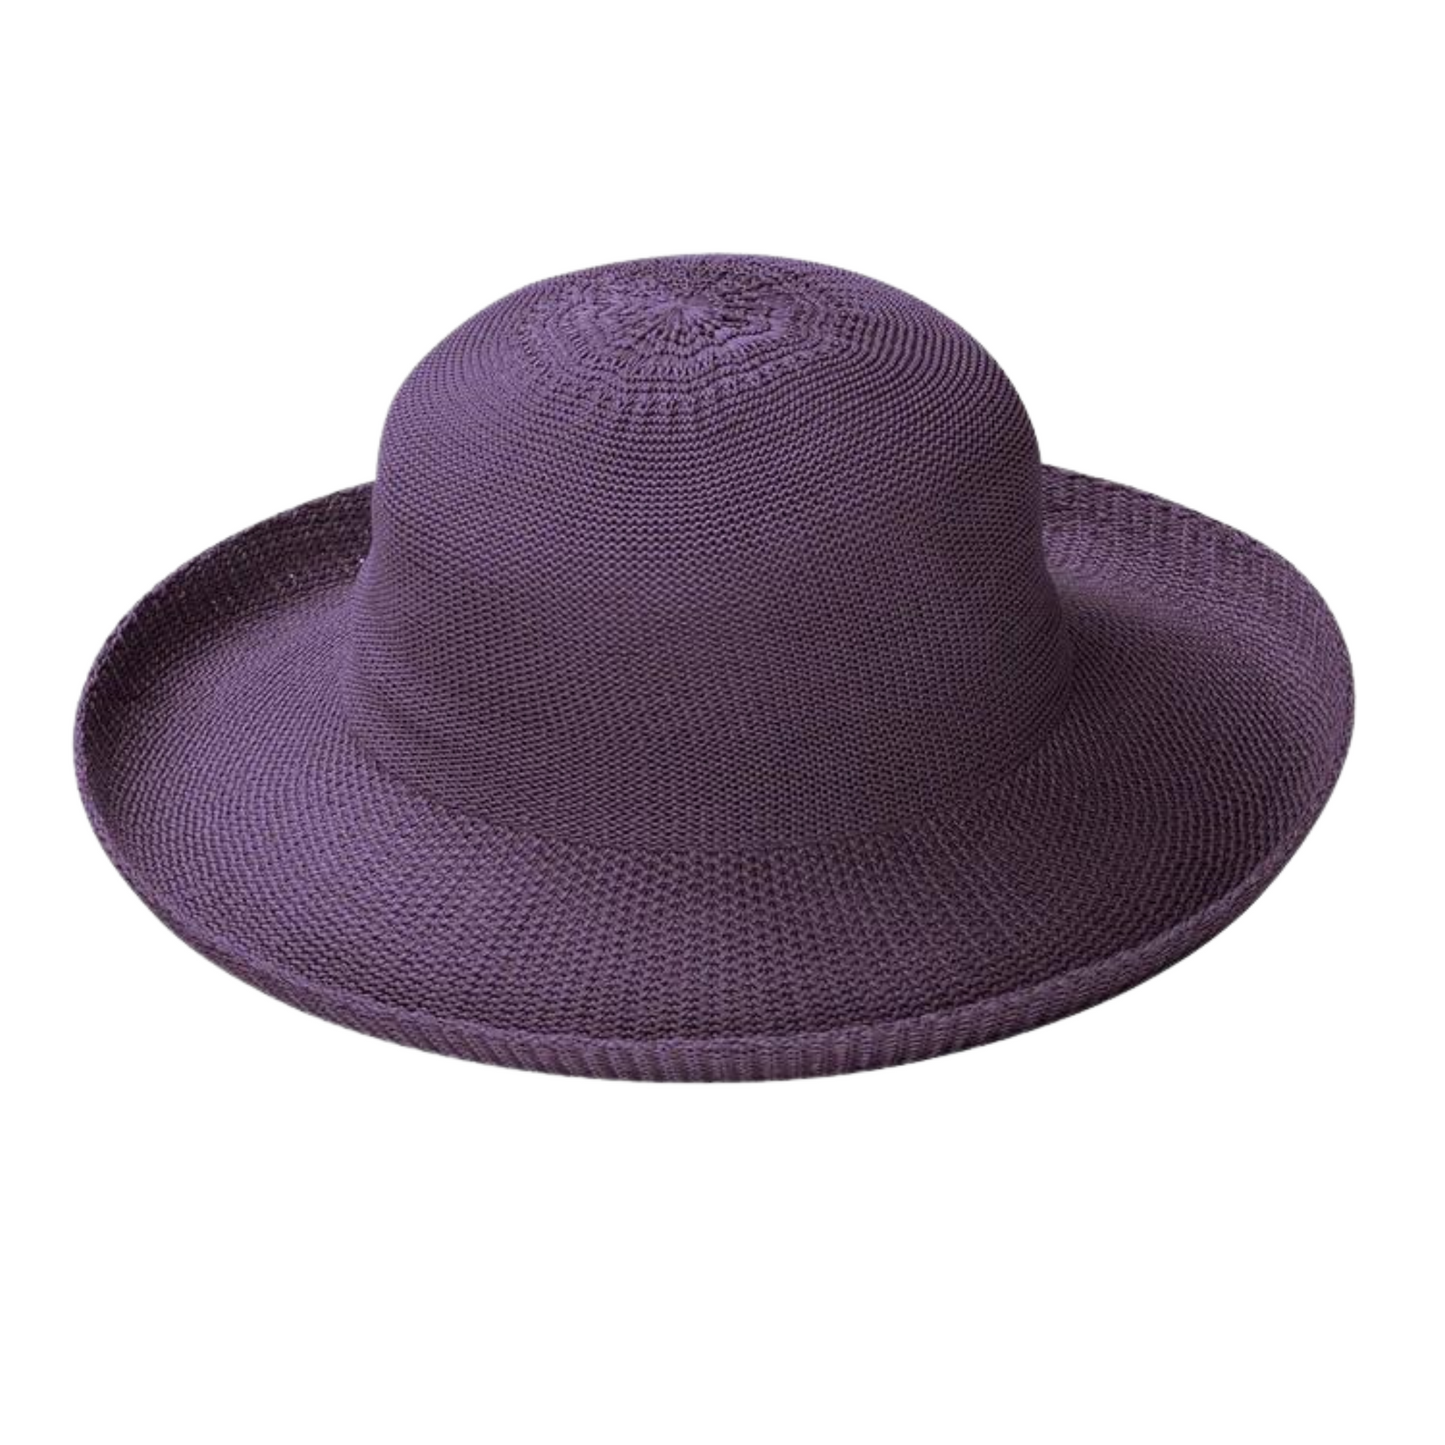 Dark-violet weaved hat with soft curvature and rolled in brim.